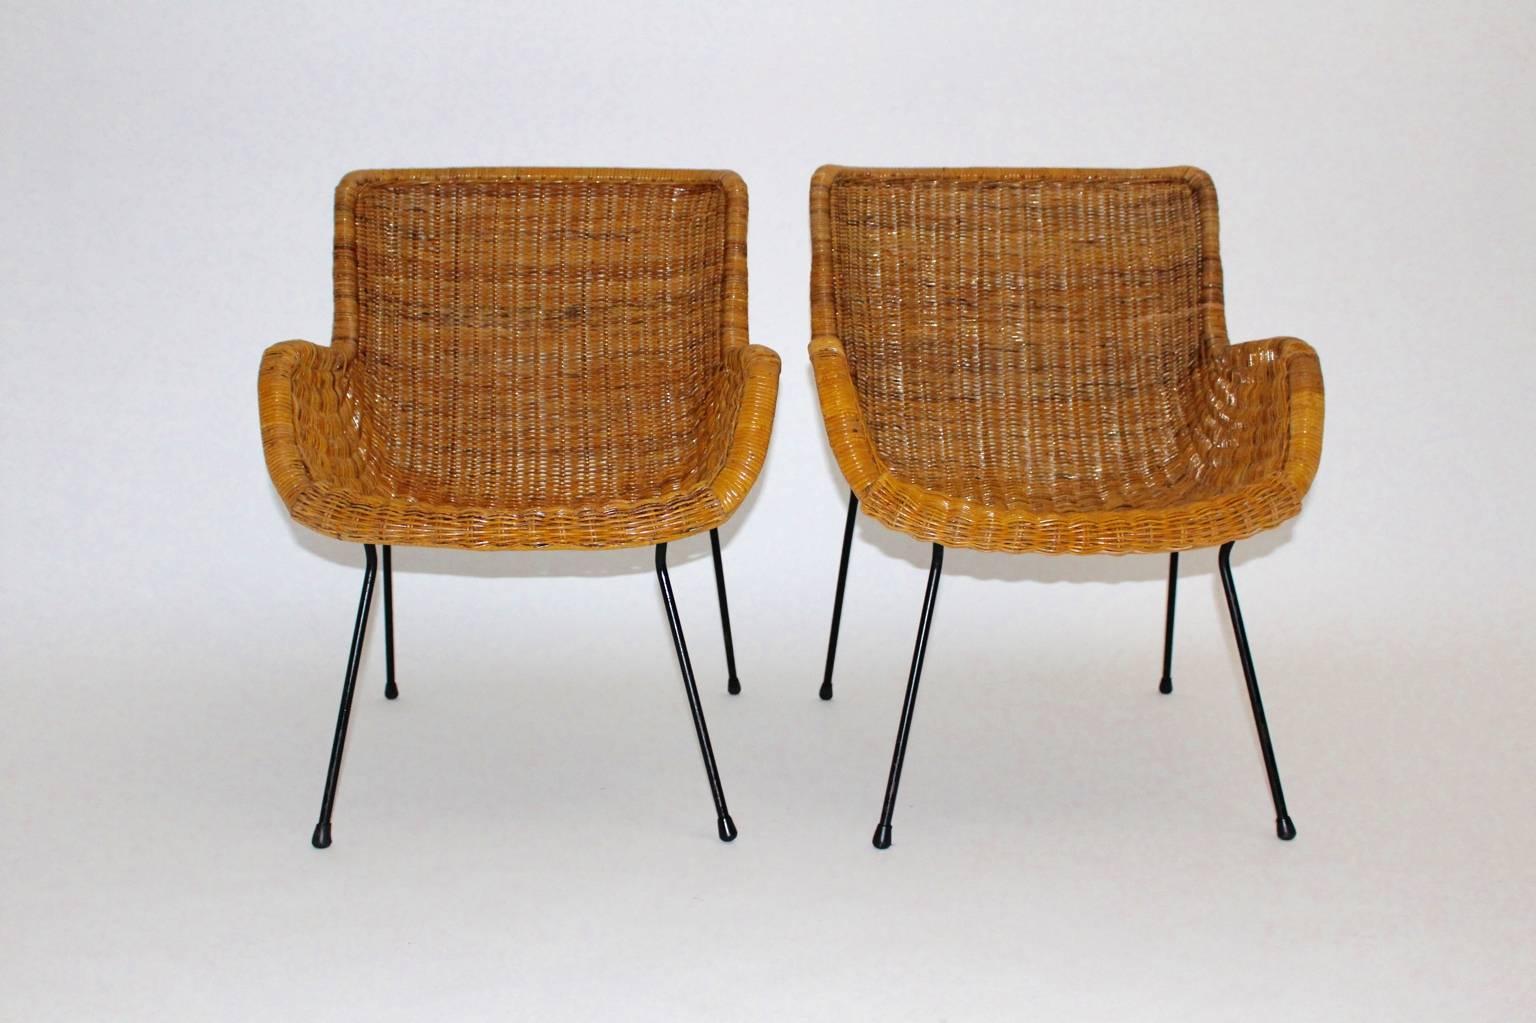 These charming and comfortable pair of wicker armchairs shows a base with black lacquered tube steel and rubber feet.
Also the honey brown colored seat shell was made of wicker work.

These wicker armchairs are in very good vintage condition and